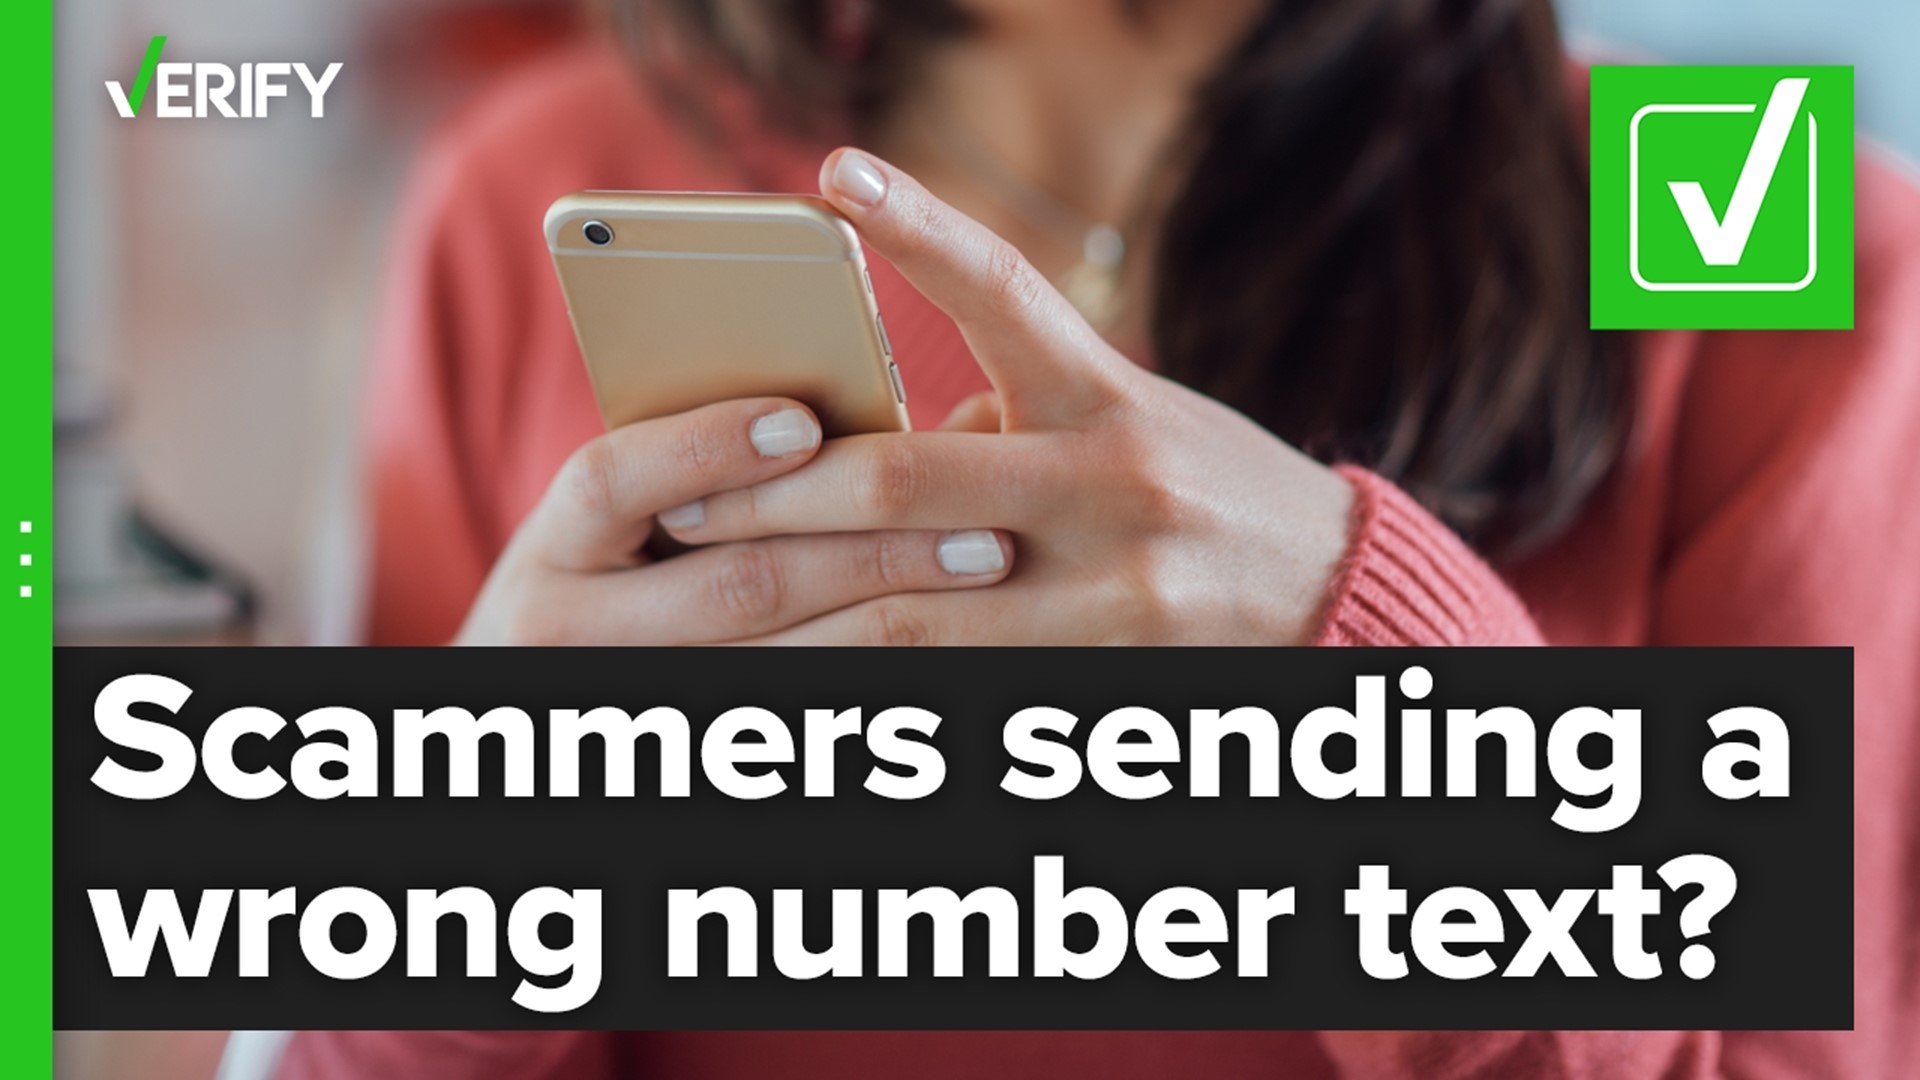 Some scammers pretend to have the wrong number to get you to respond. That’s why it’s best to play it safe and ignore texts from strangers.